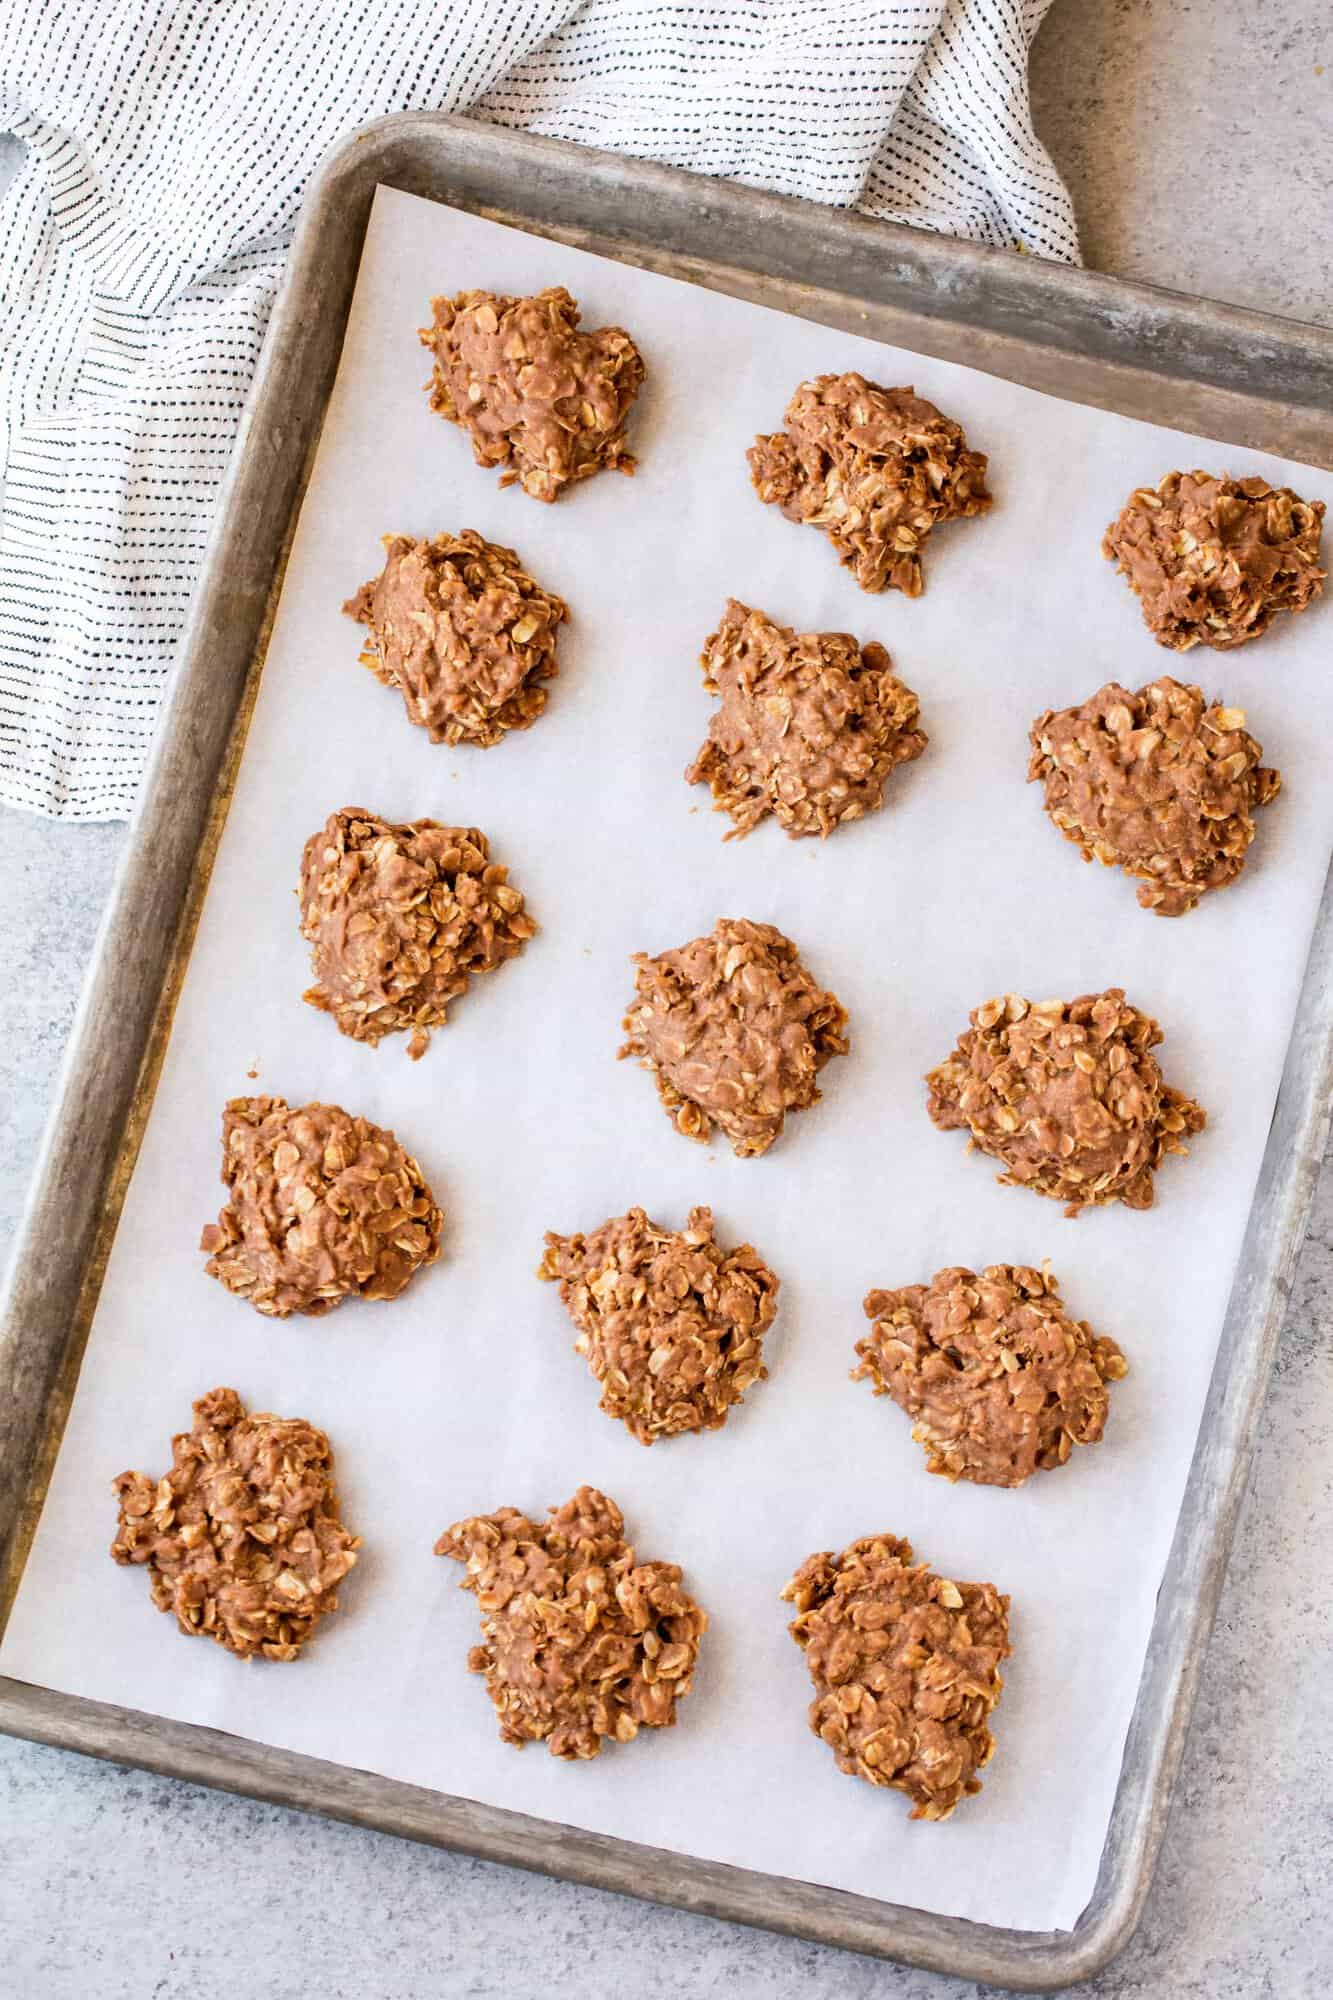 Classic no bake cookies get a Nutella twist in these Peanut Butter Nutella No Bake Cookies. Nutella lovers will go crazy over these super easy cookies.